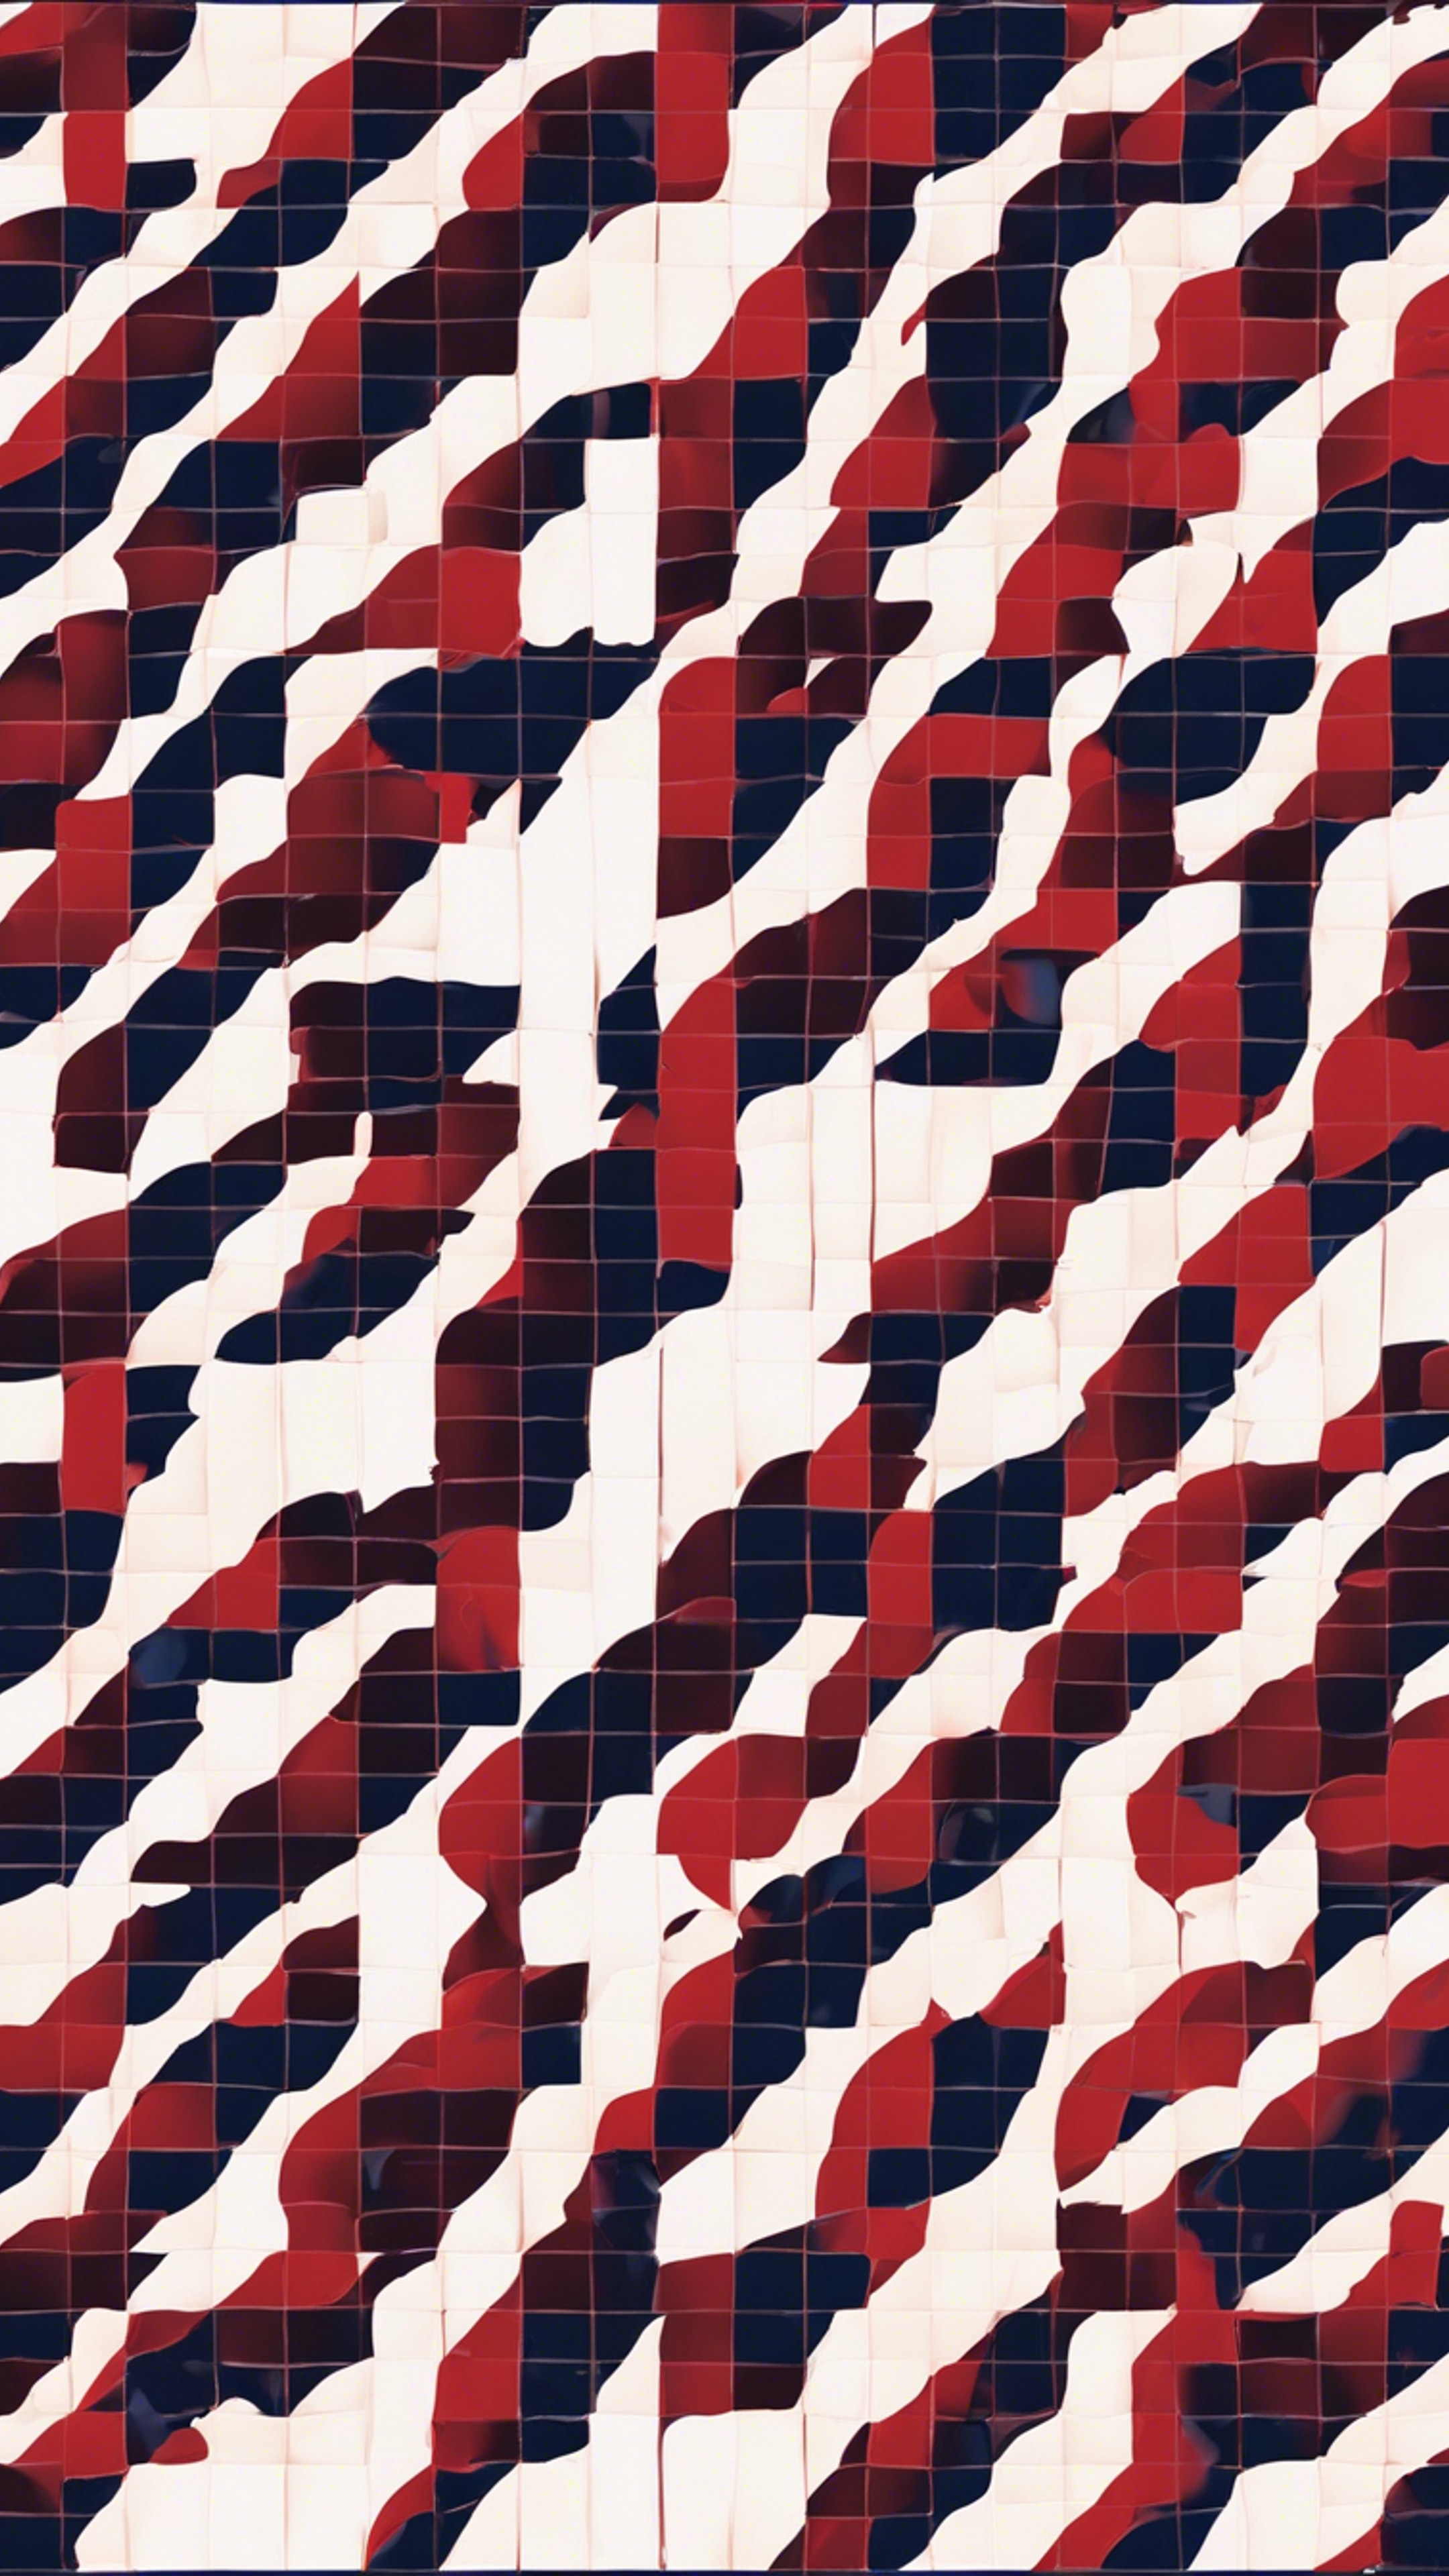 A seamless pattern of red and navy checks in large squares. Wallpaper[9c6dc6d172a14b67b0c5]